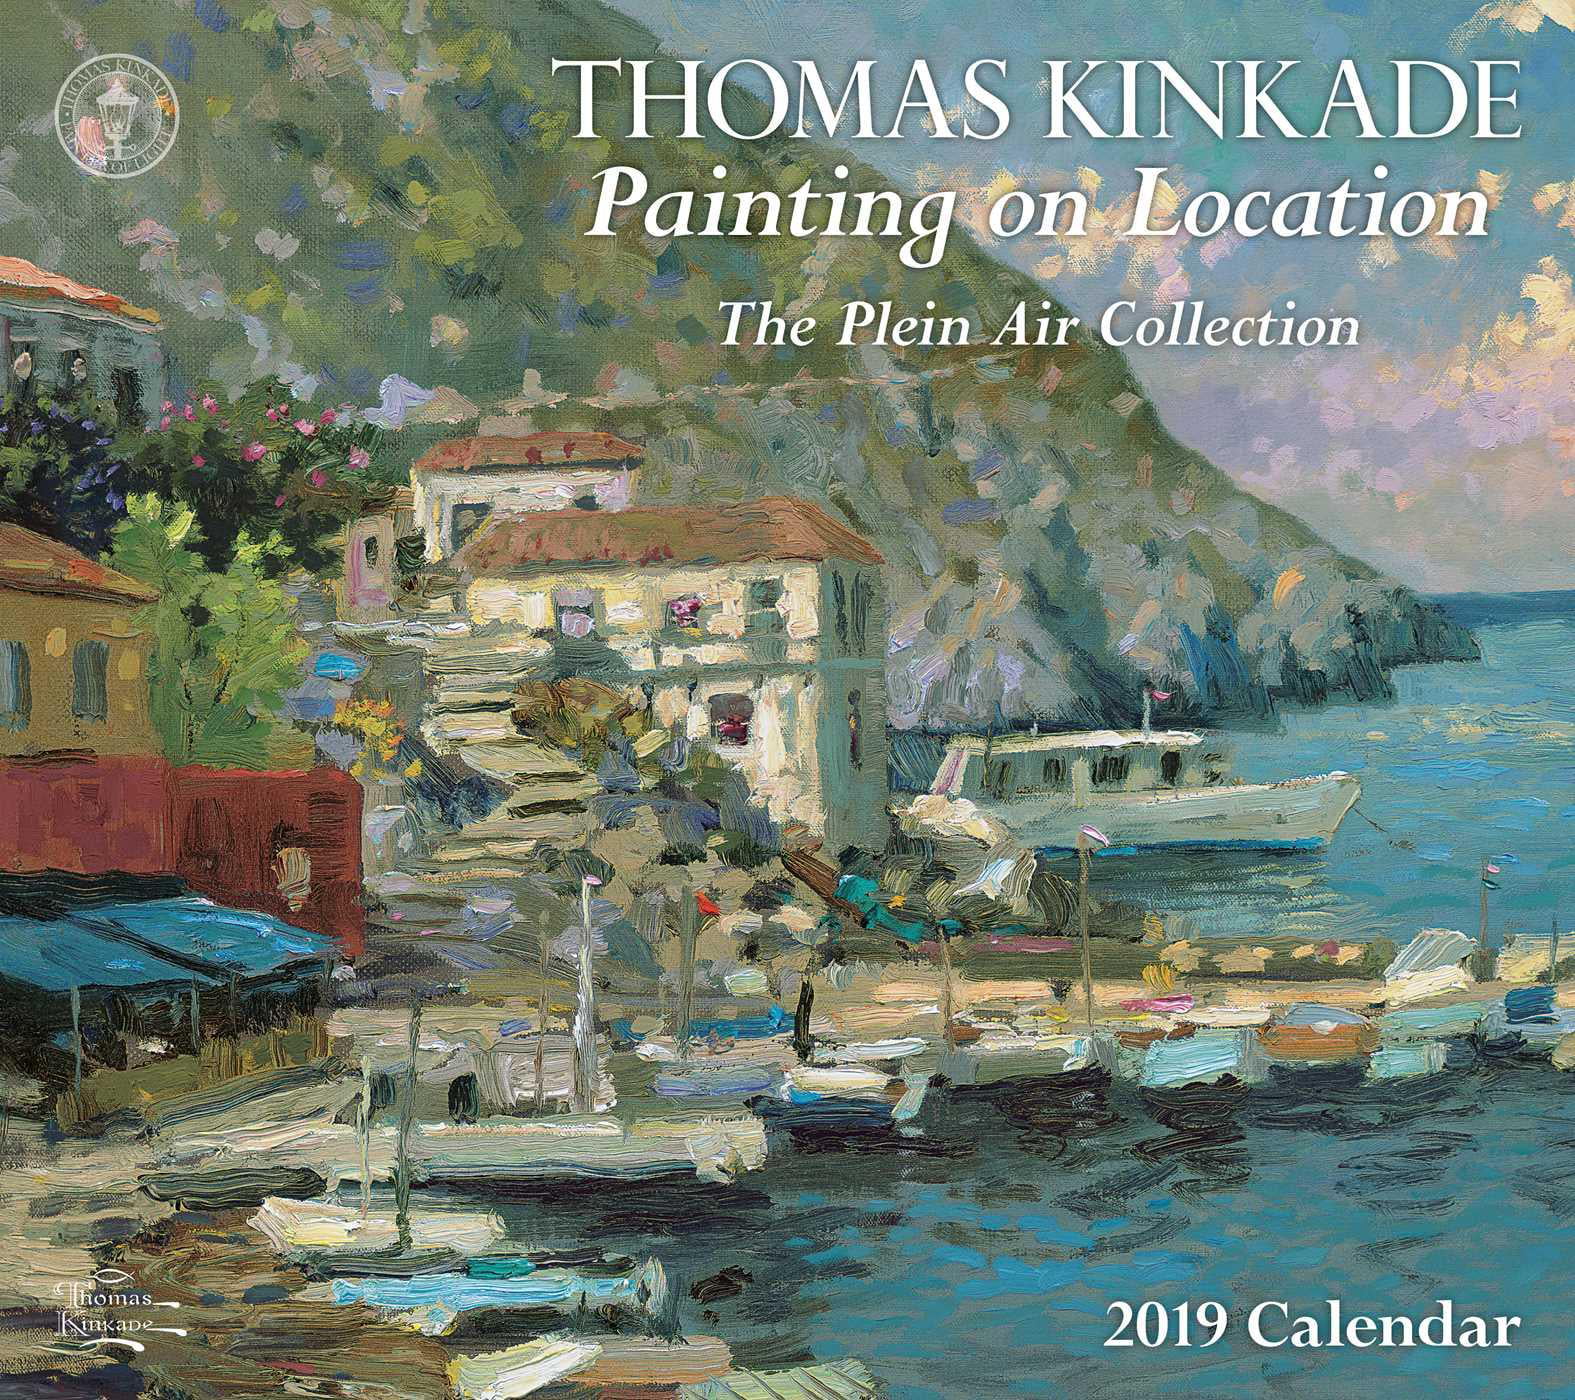 Thomas-Kinkade-Painting-on-Location-2019-Deluxe-Wall-Calendar-The-Plein-Air-Collection